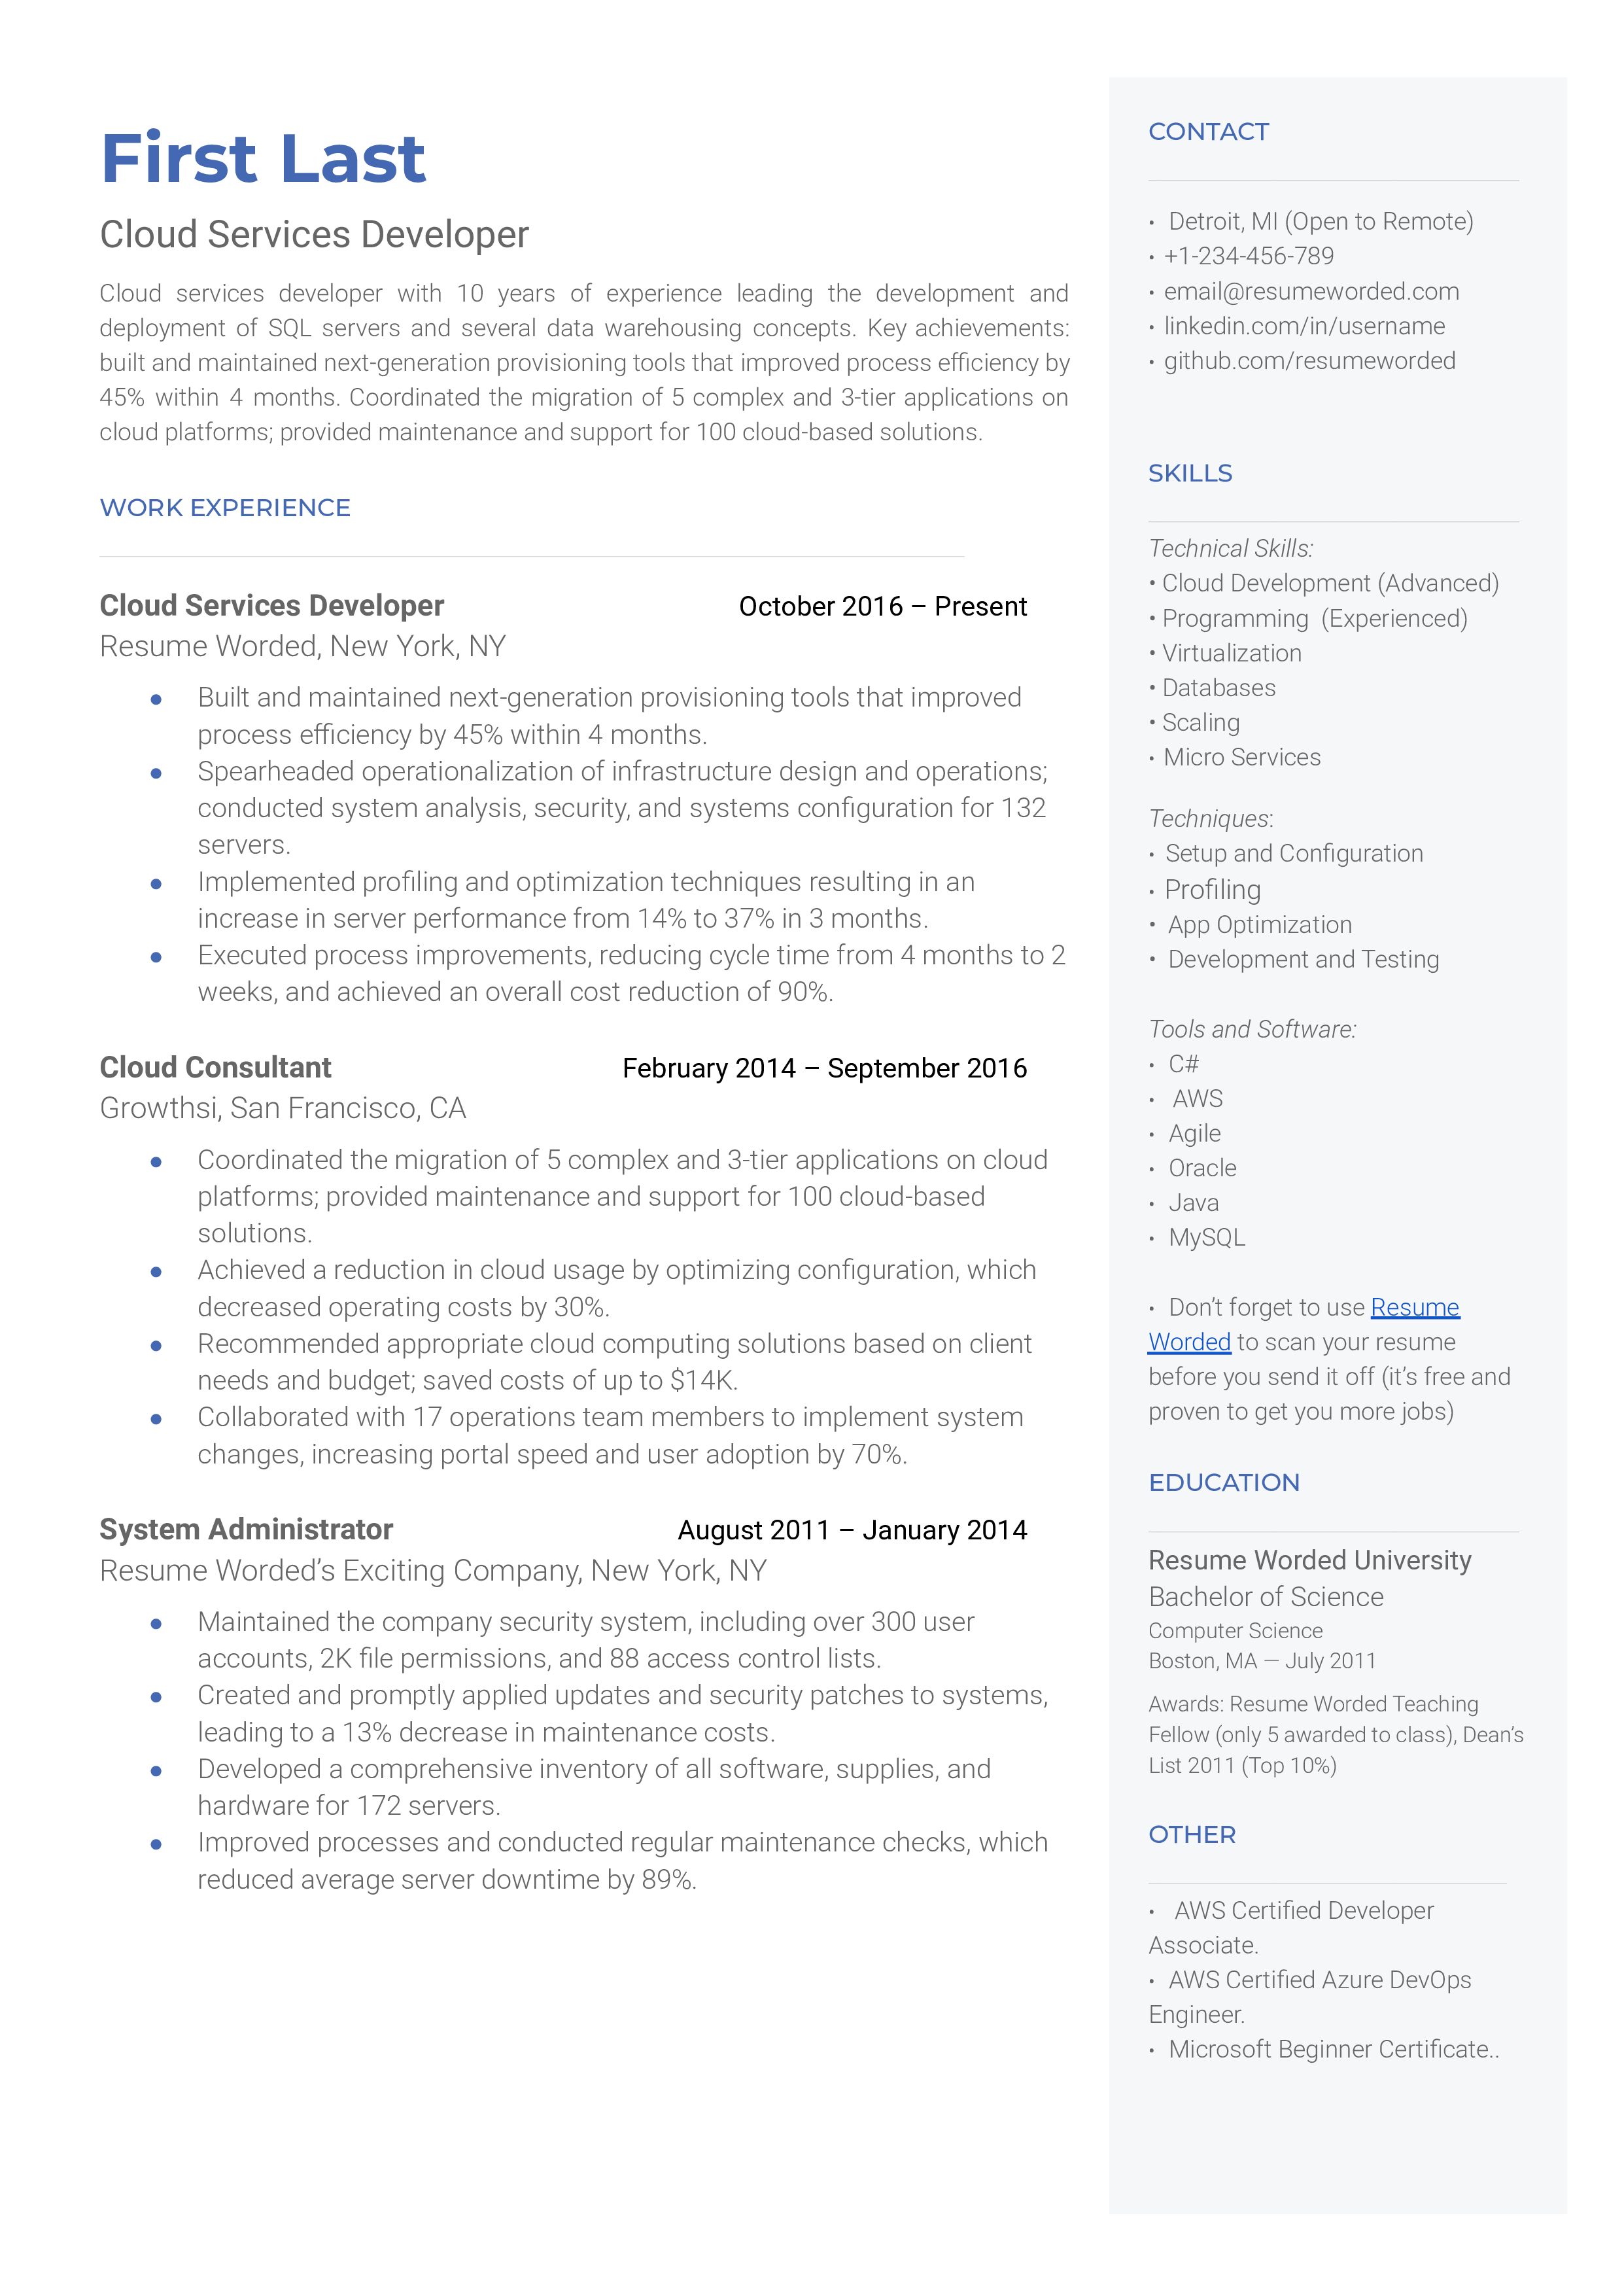 A cloud services developer resume sample that highlights the applicant’s career progression and certifications.